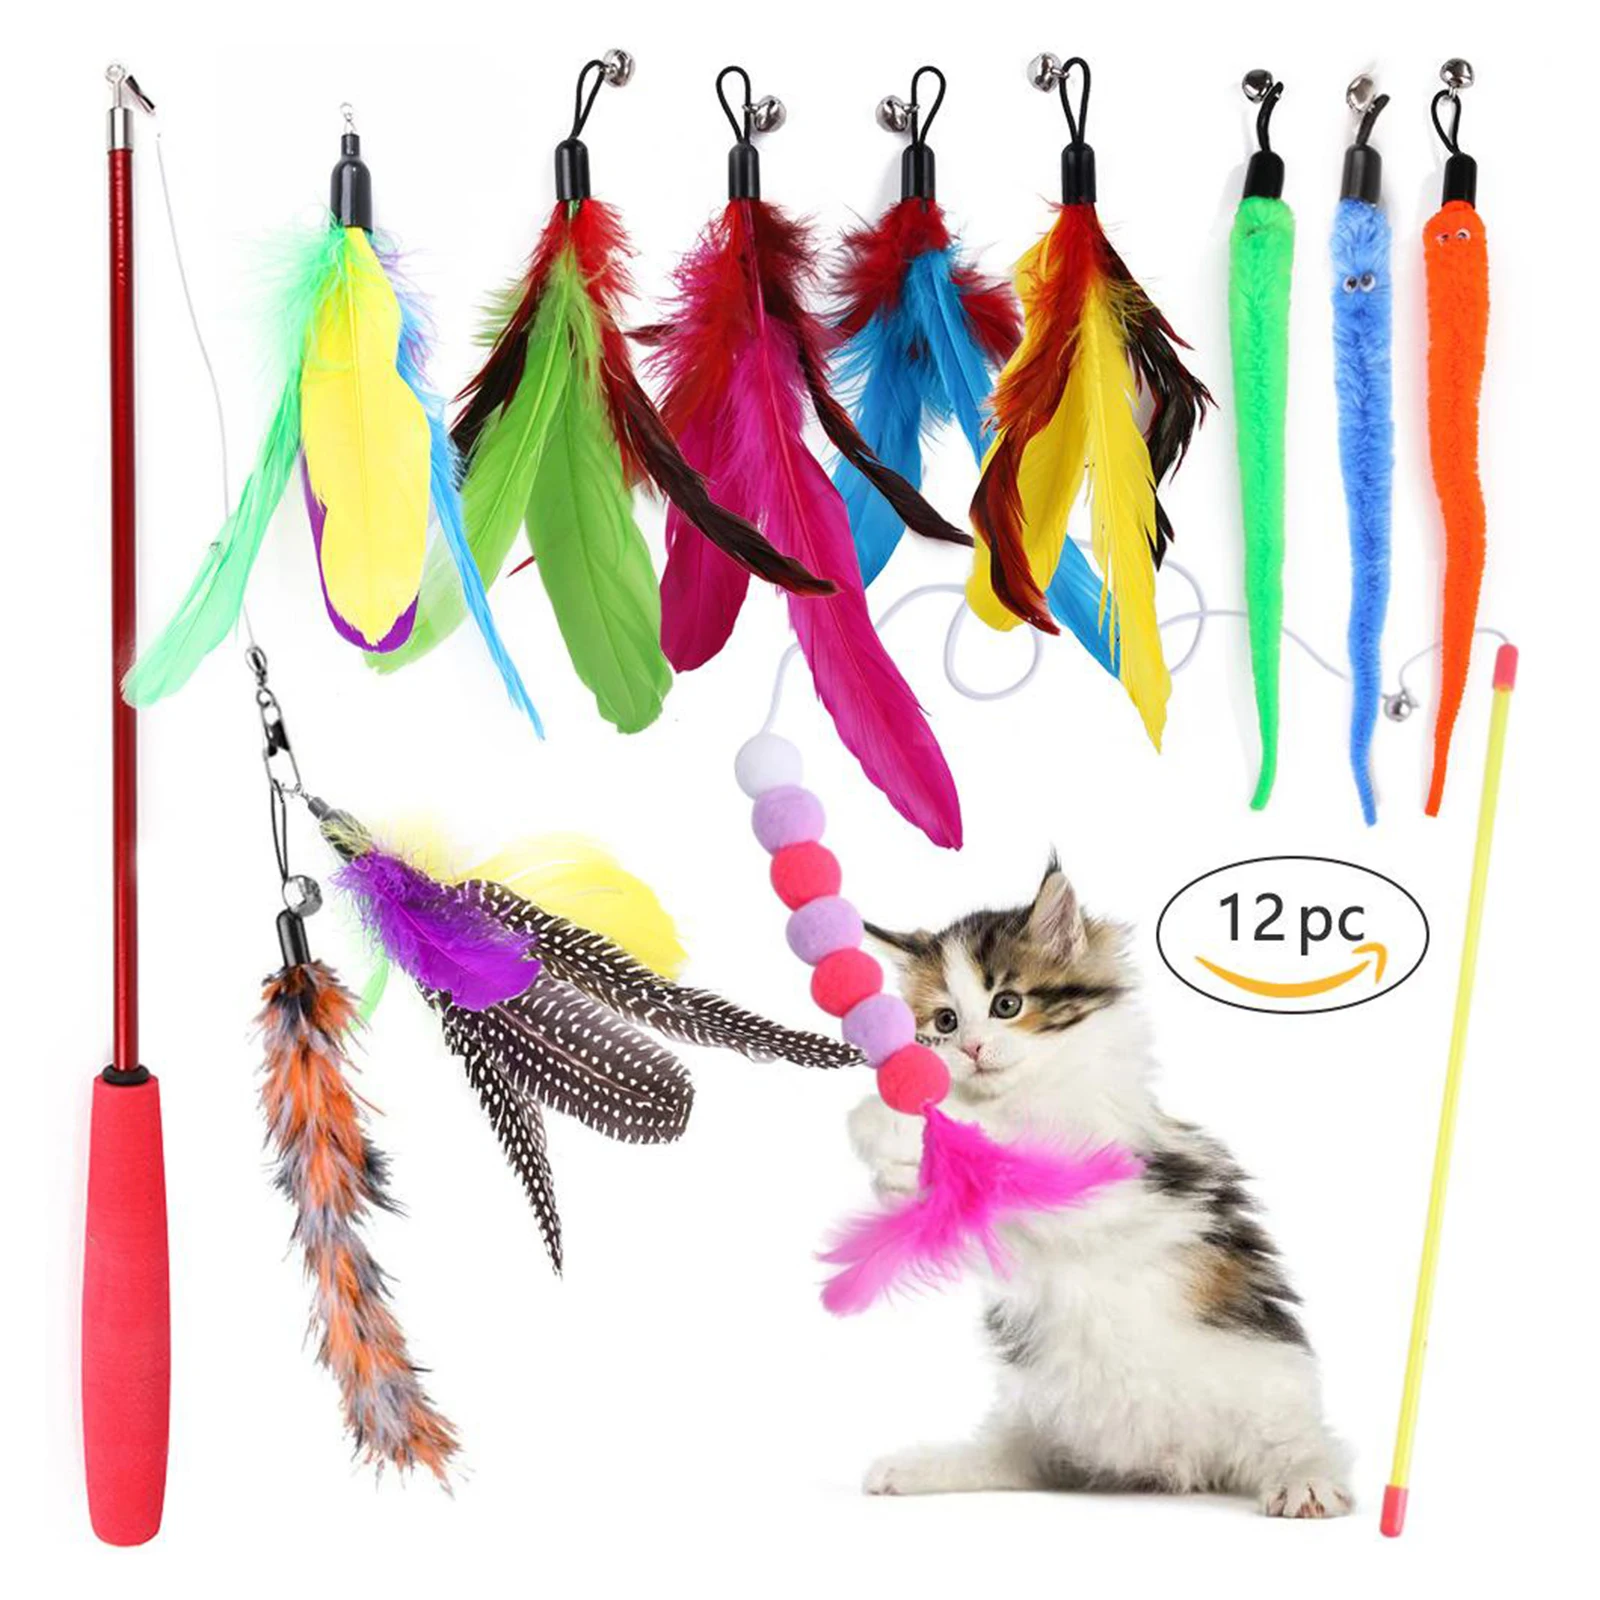 

Extendable Feather Interactive Teaser Wand Toys with 8 Refills for Cats Birds Training